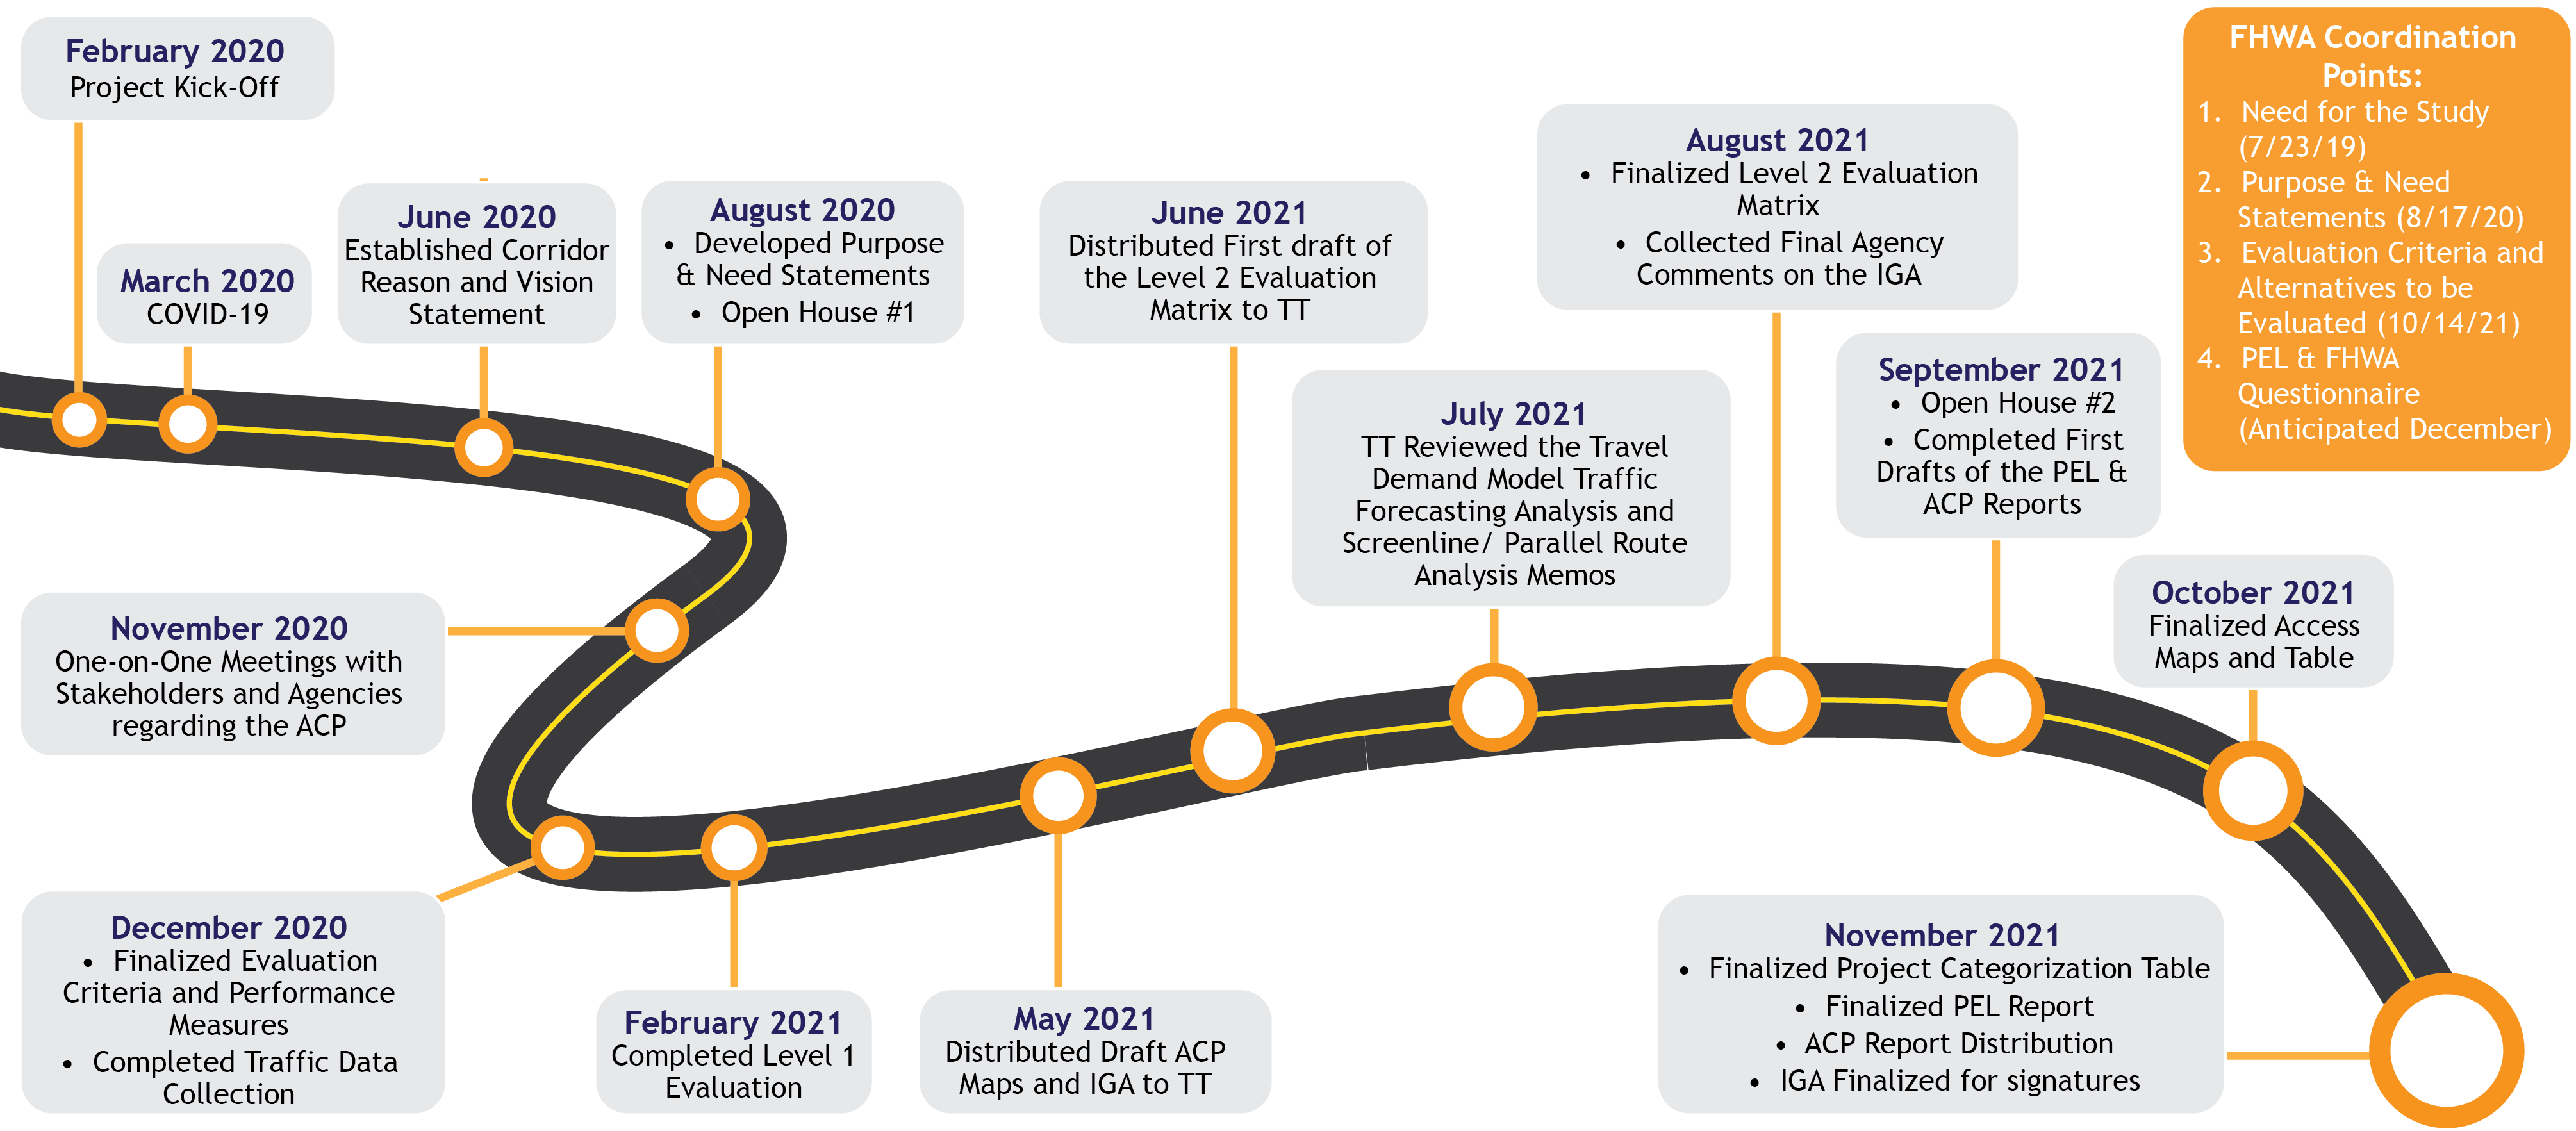 Timeline Overview Graphic6-01 (1).png detail image